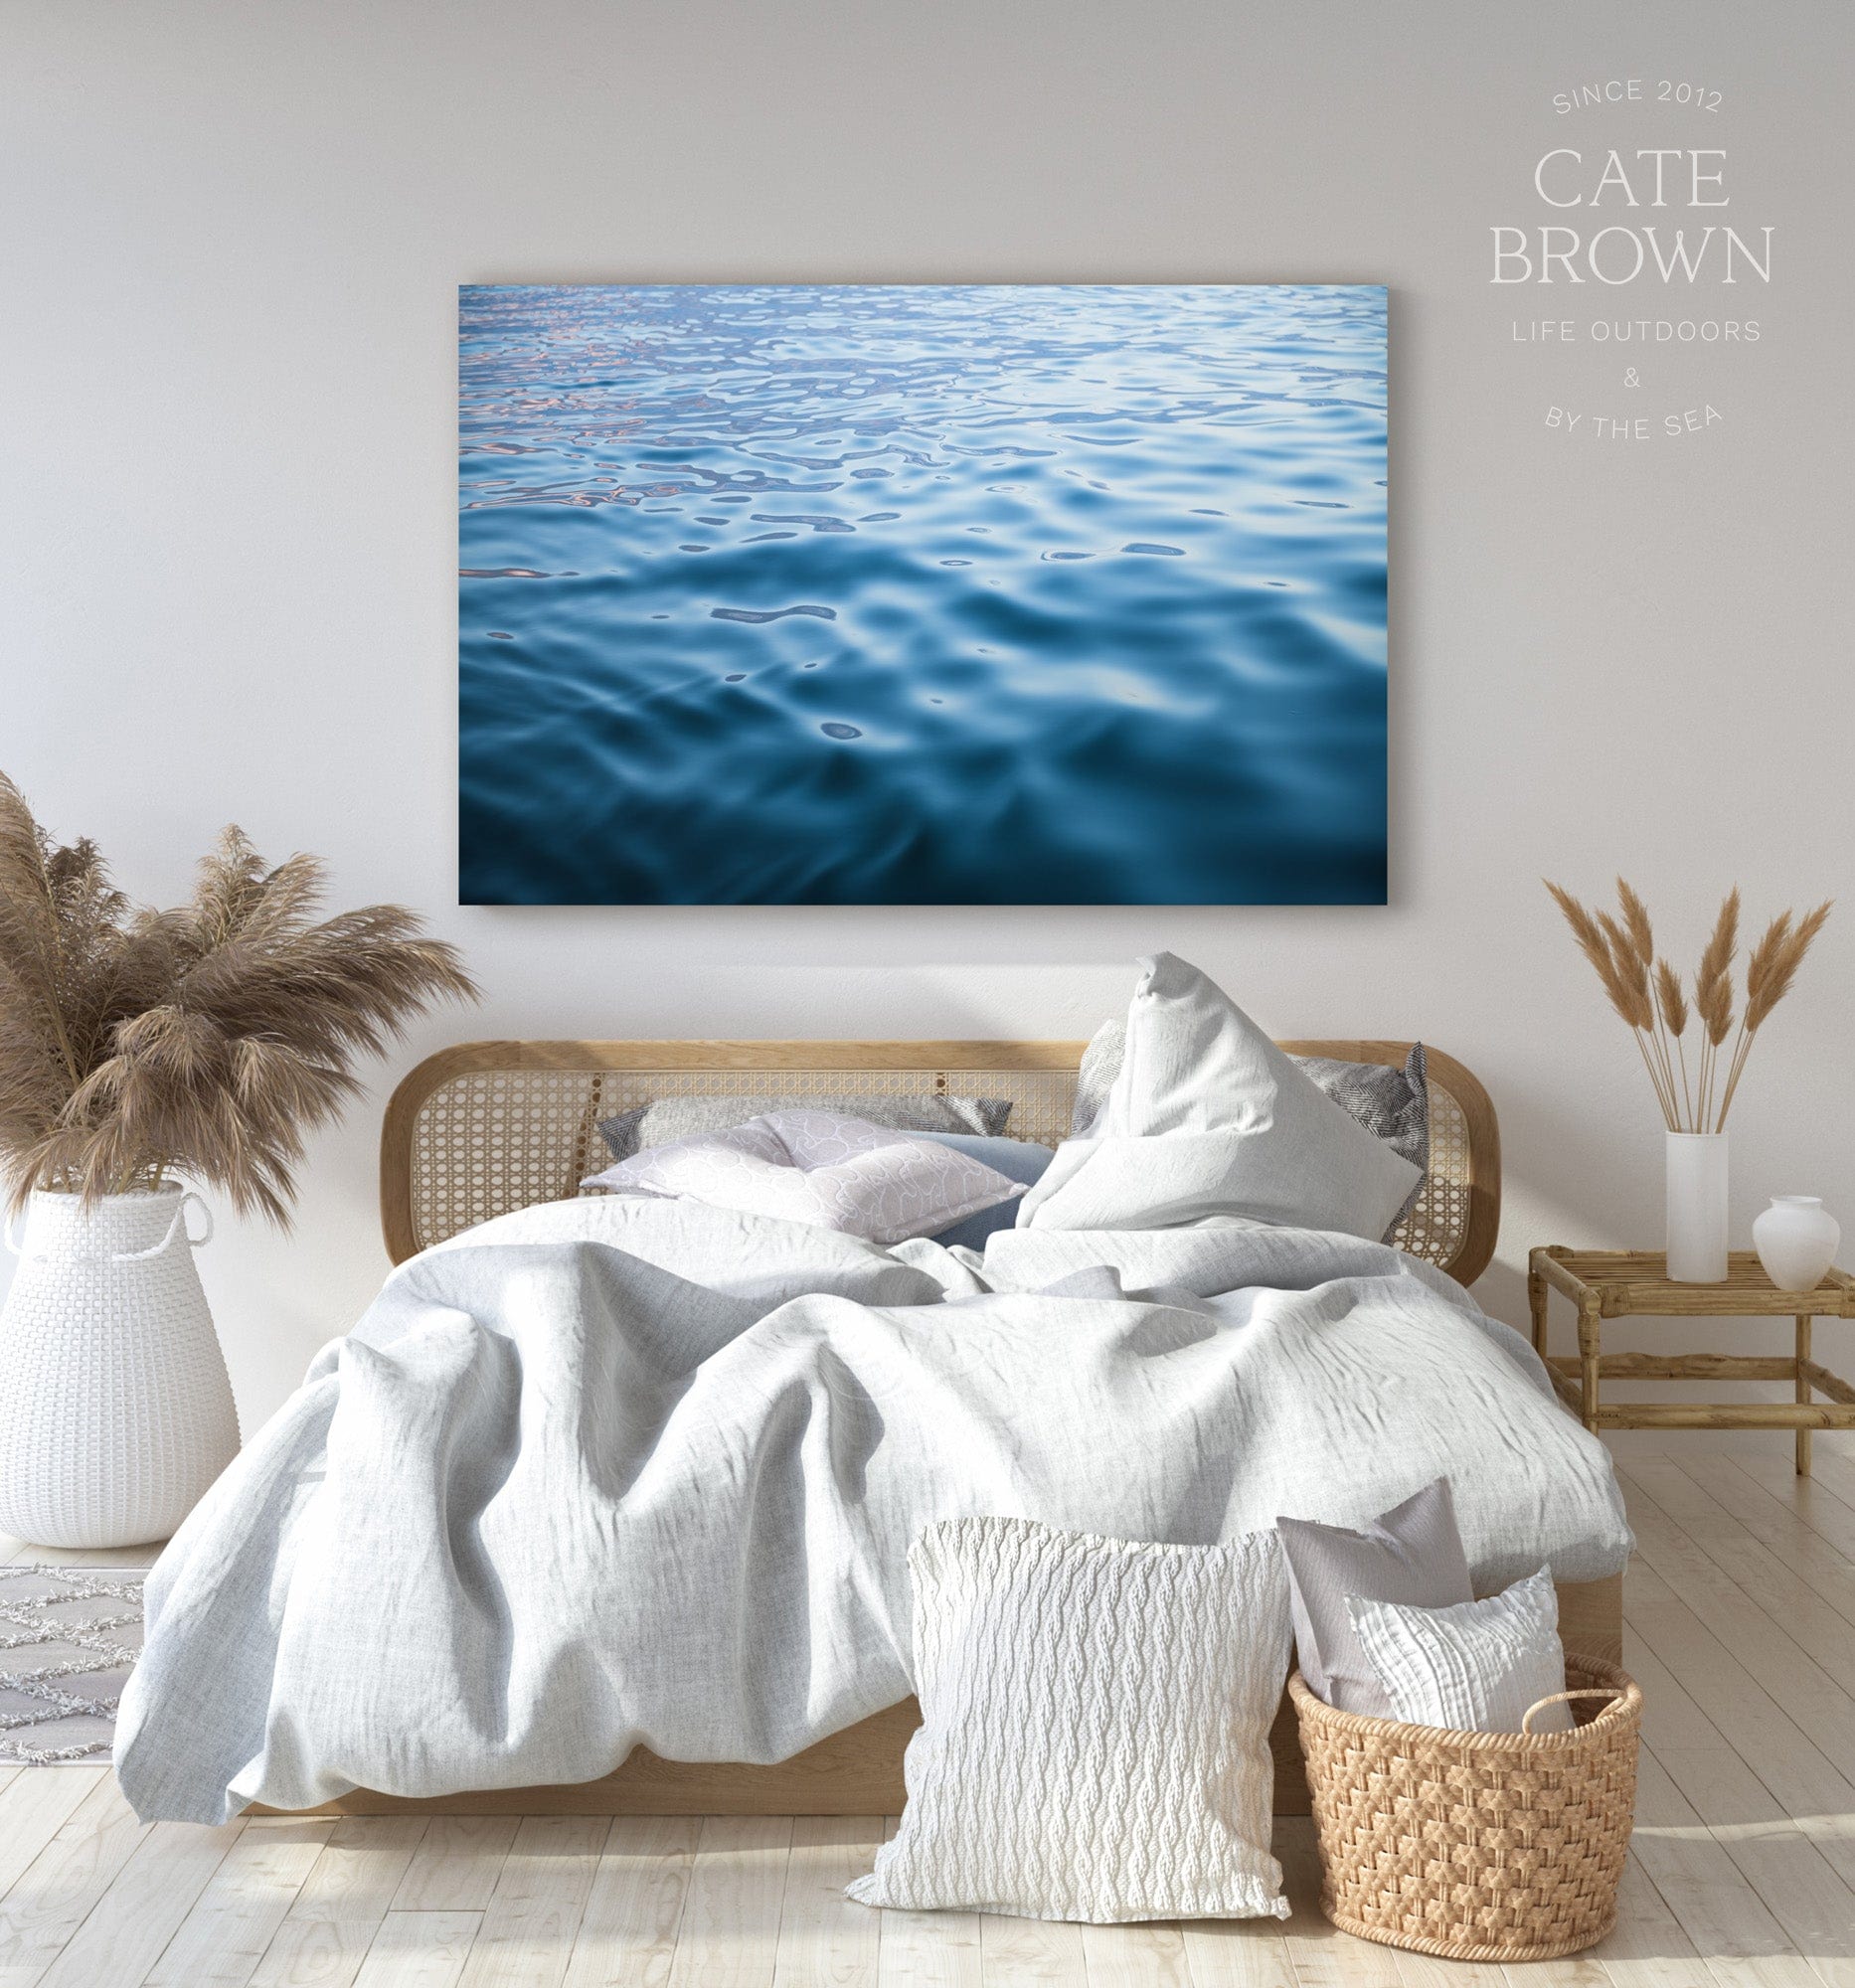 Cate Brown Photo Canvas / 16"x24" / None (Print Only) Narragansett Waters #5  //  Ocean Photography Made to Order Ocean Fine Art